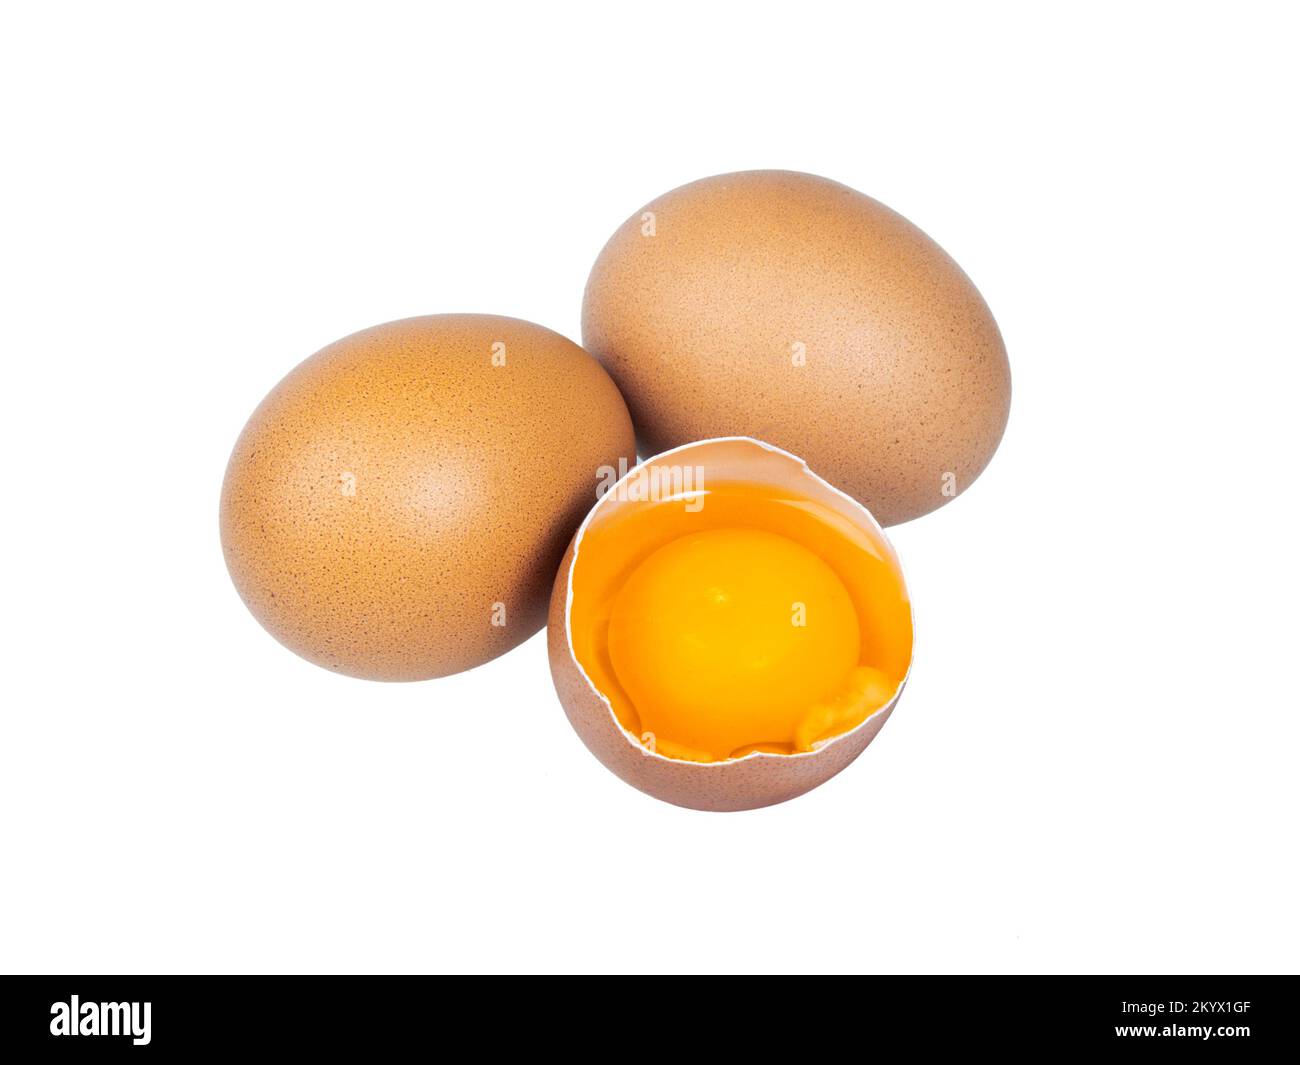 Eggs whole  and one broken isolated on a white background. Stock Photo